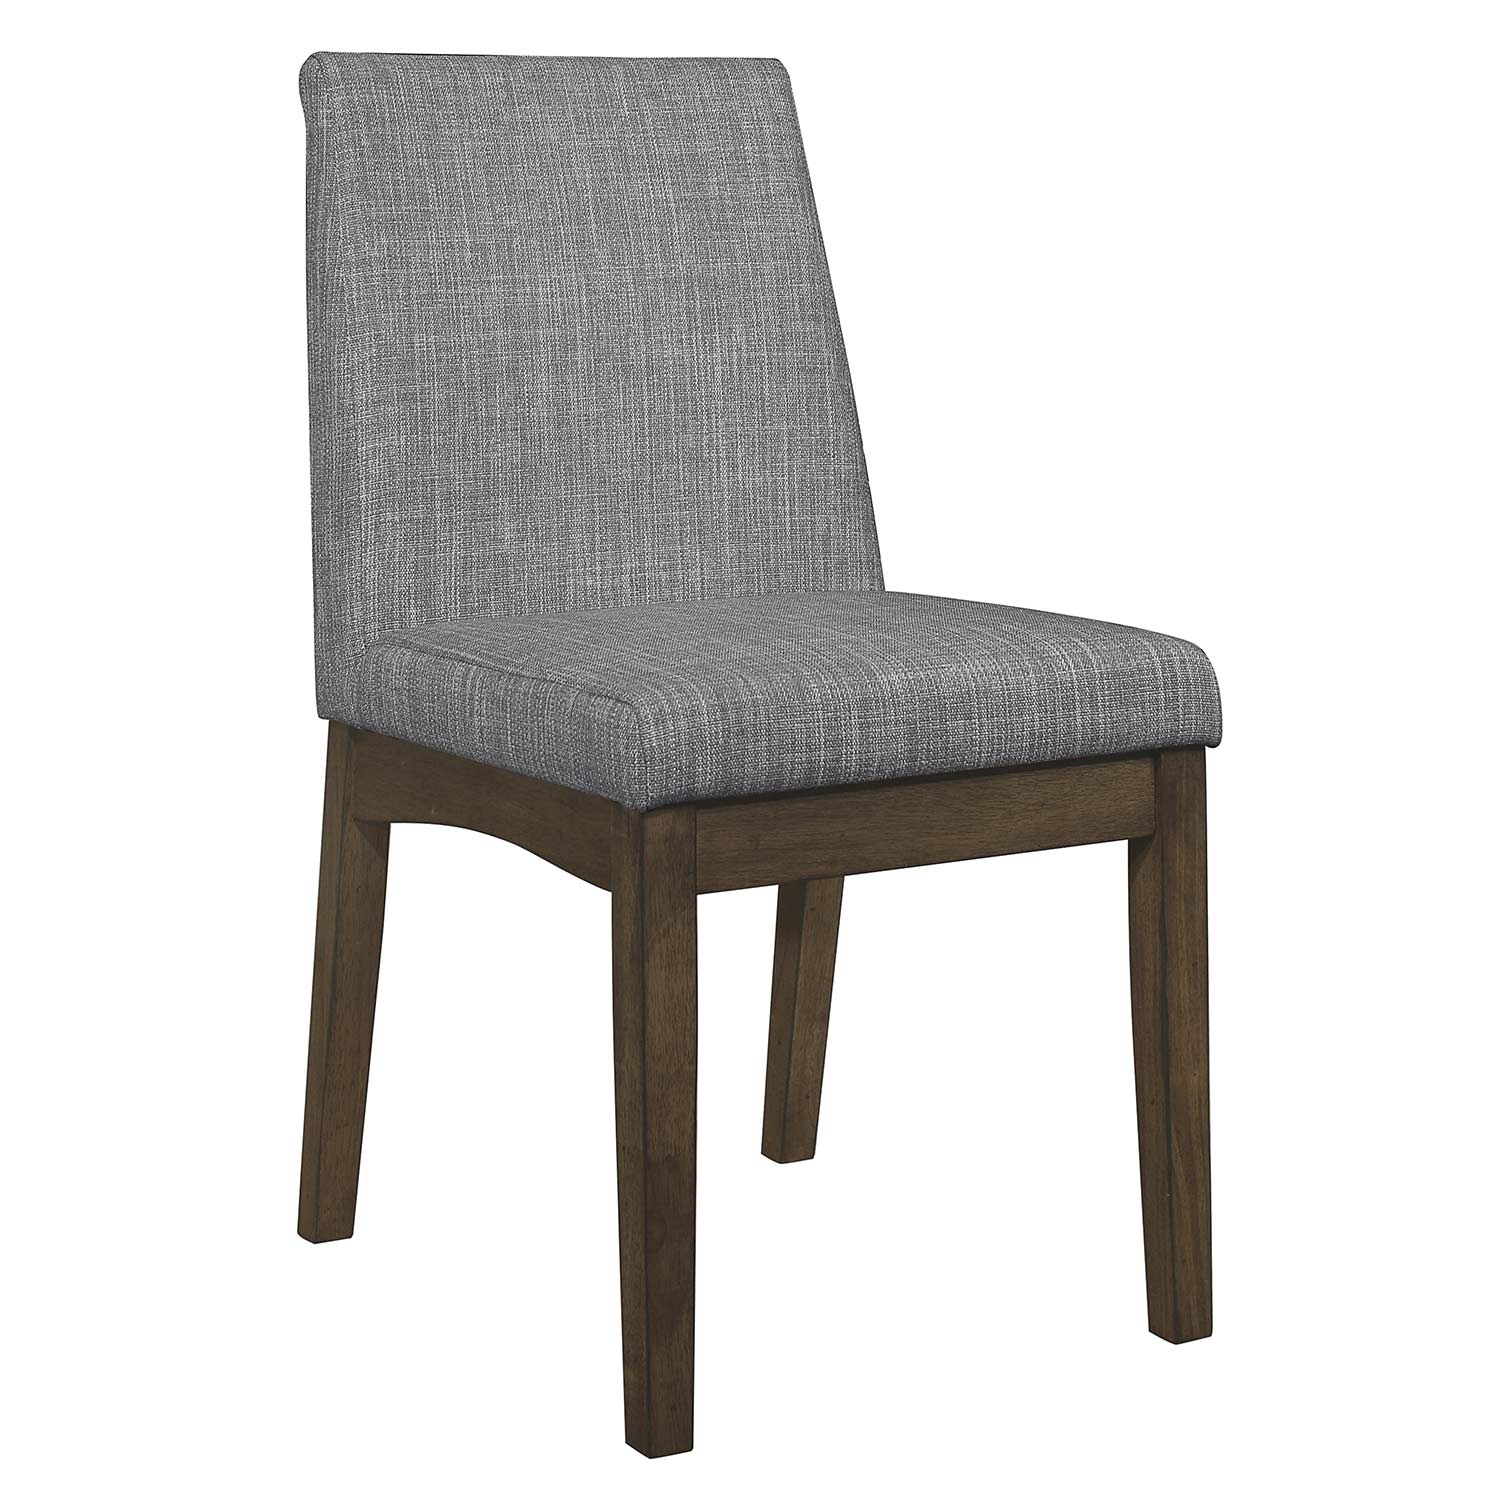 Homelegance Whittaker Side Chair - Light Burnished Brown